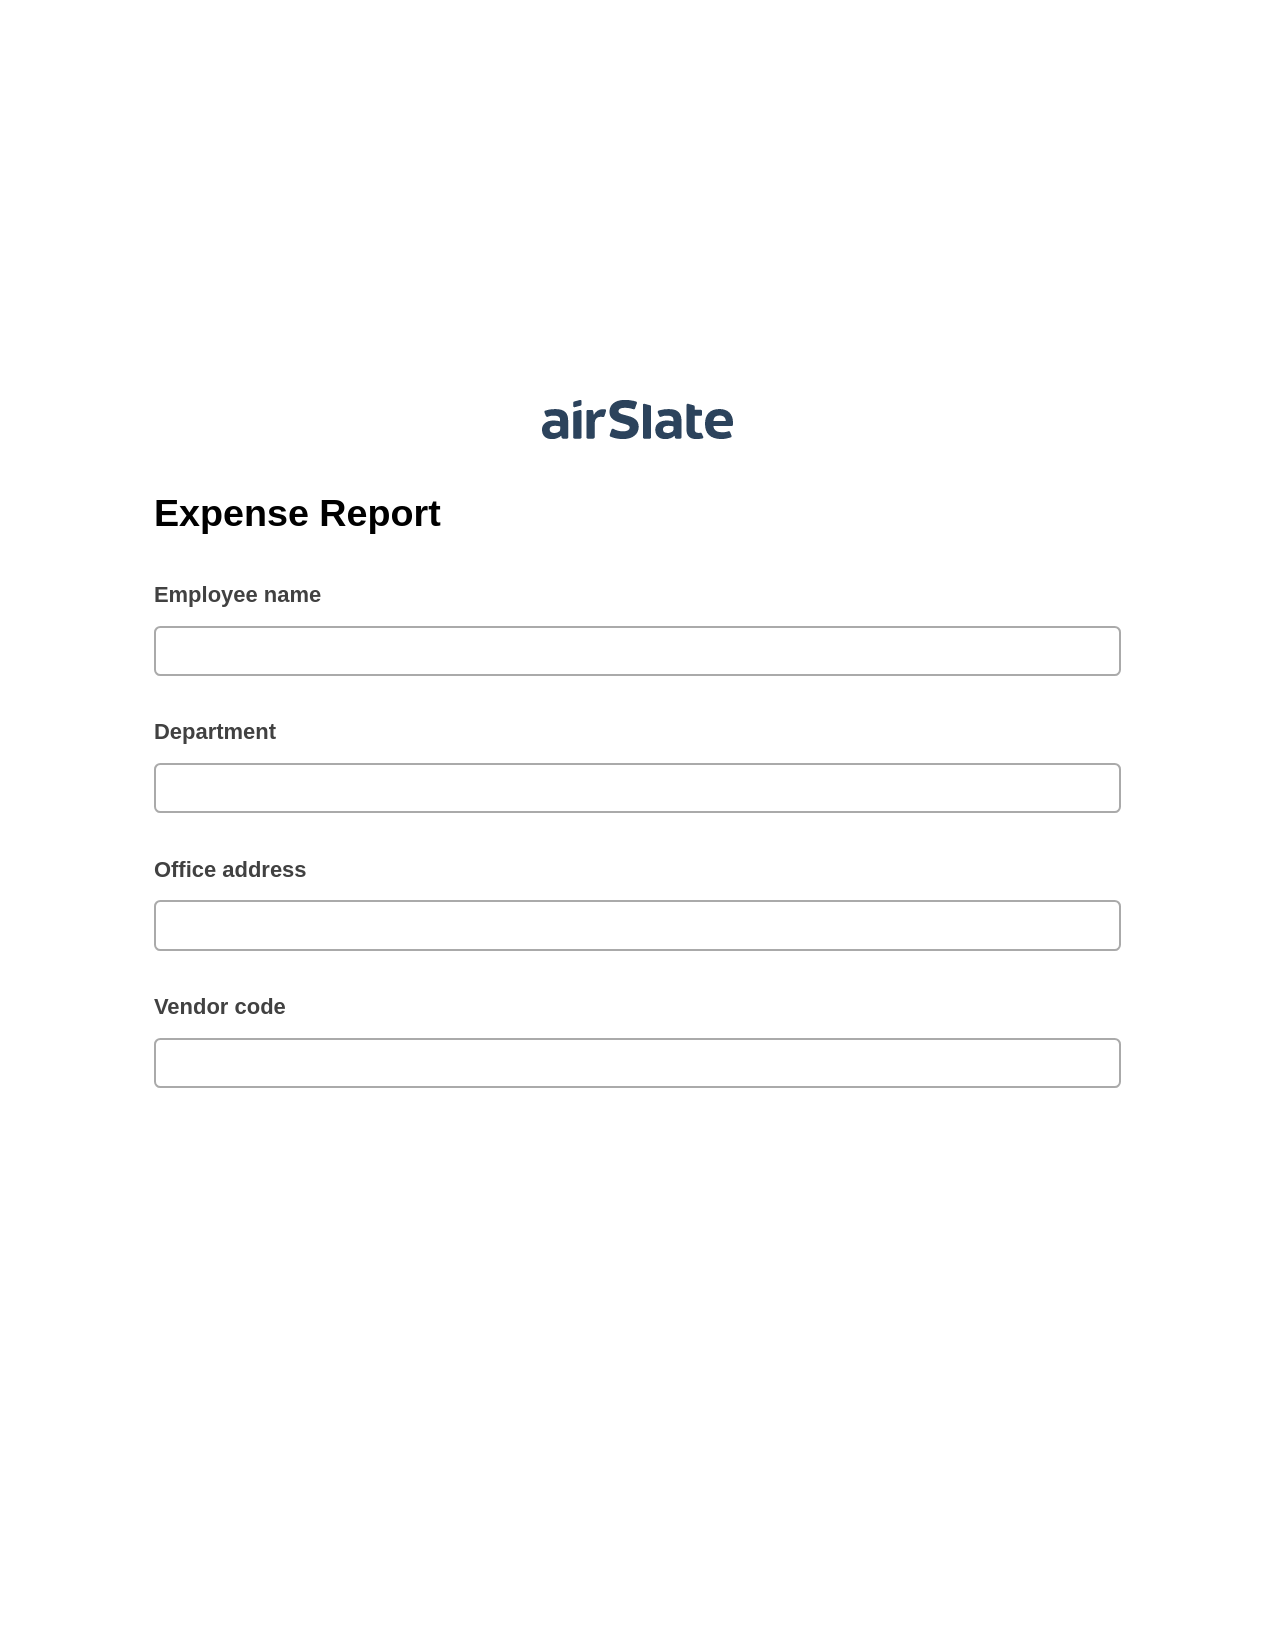 Multirole Expense Report Pre-fill from CSV File Bot, Hide Signatures Bot, Export to Google Sheet Bot